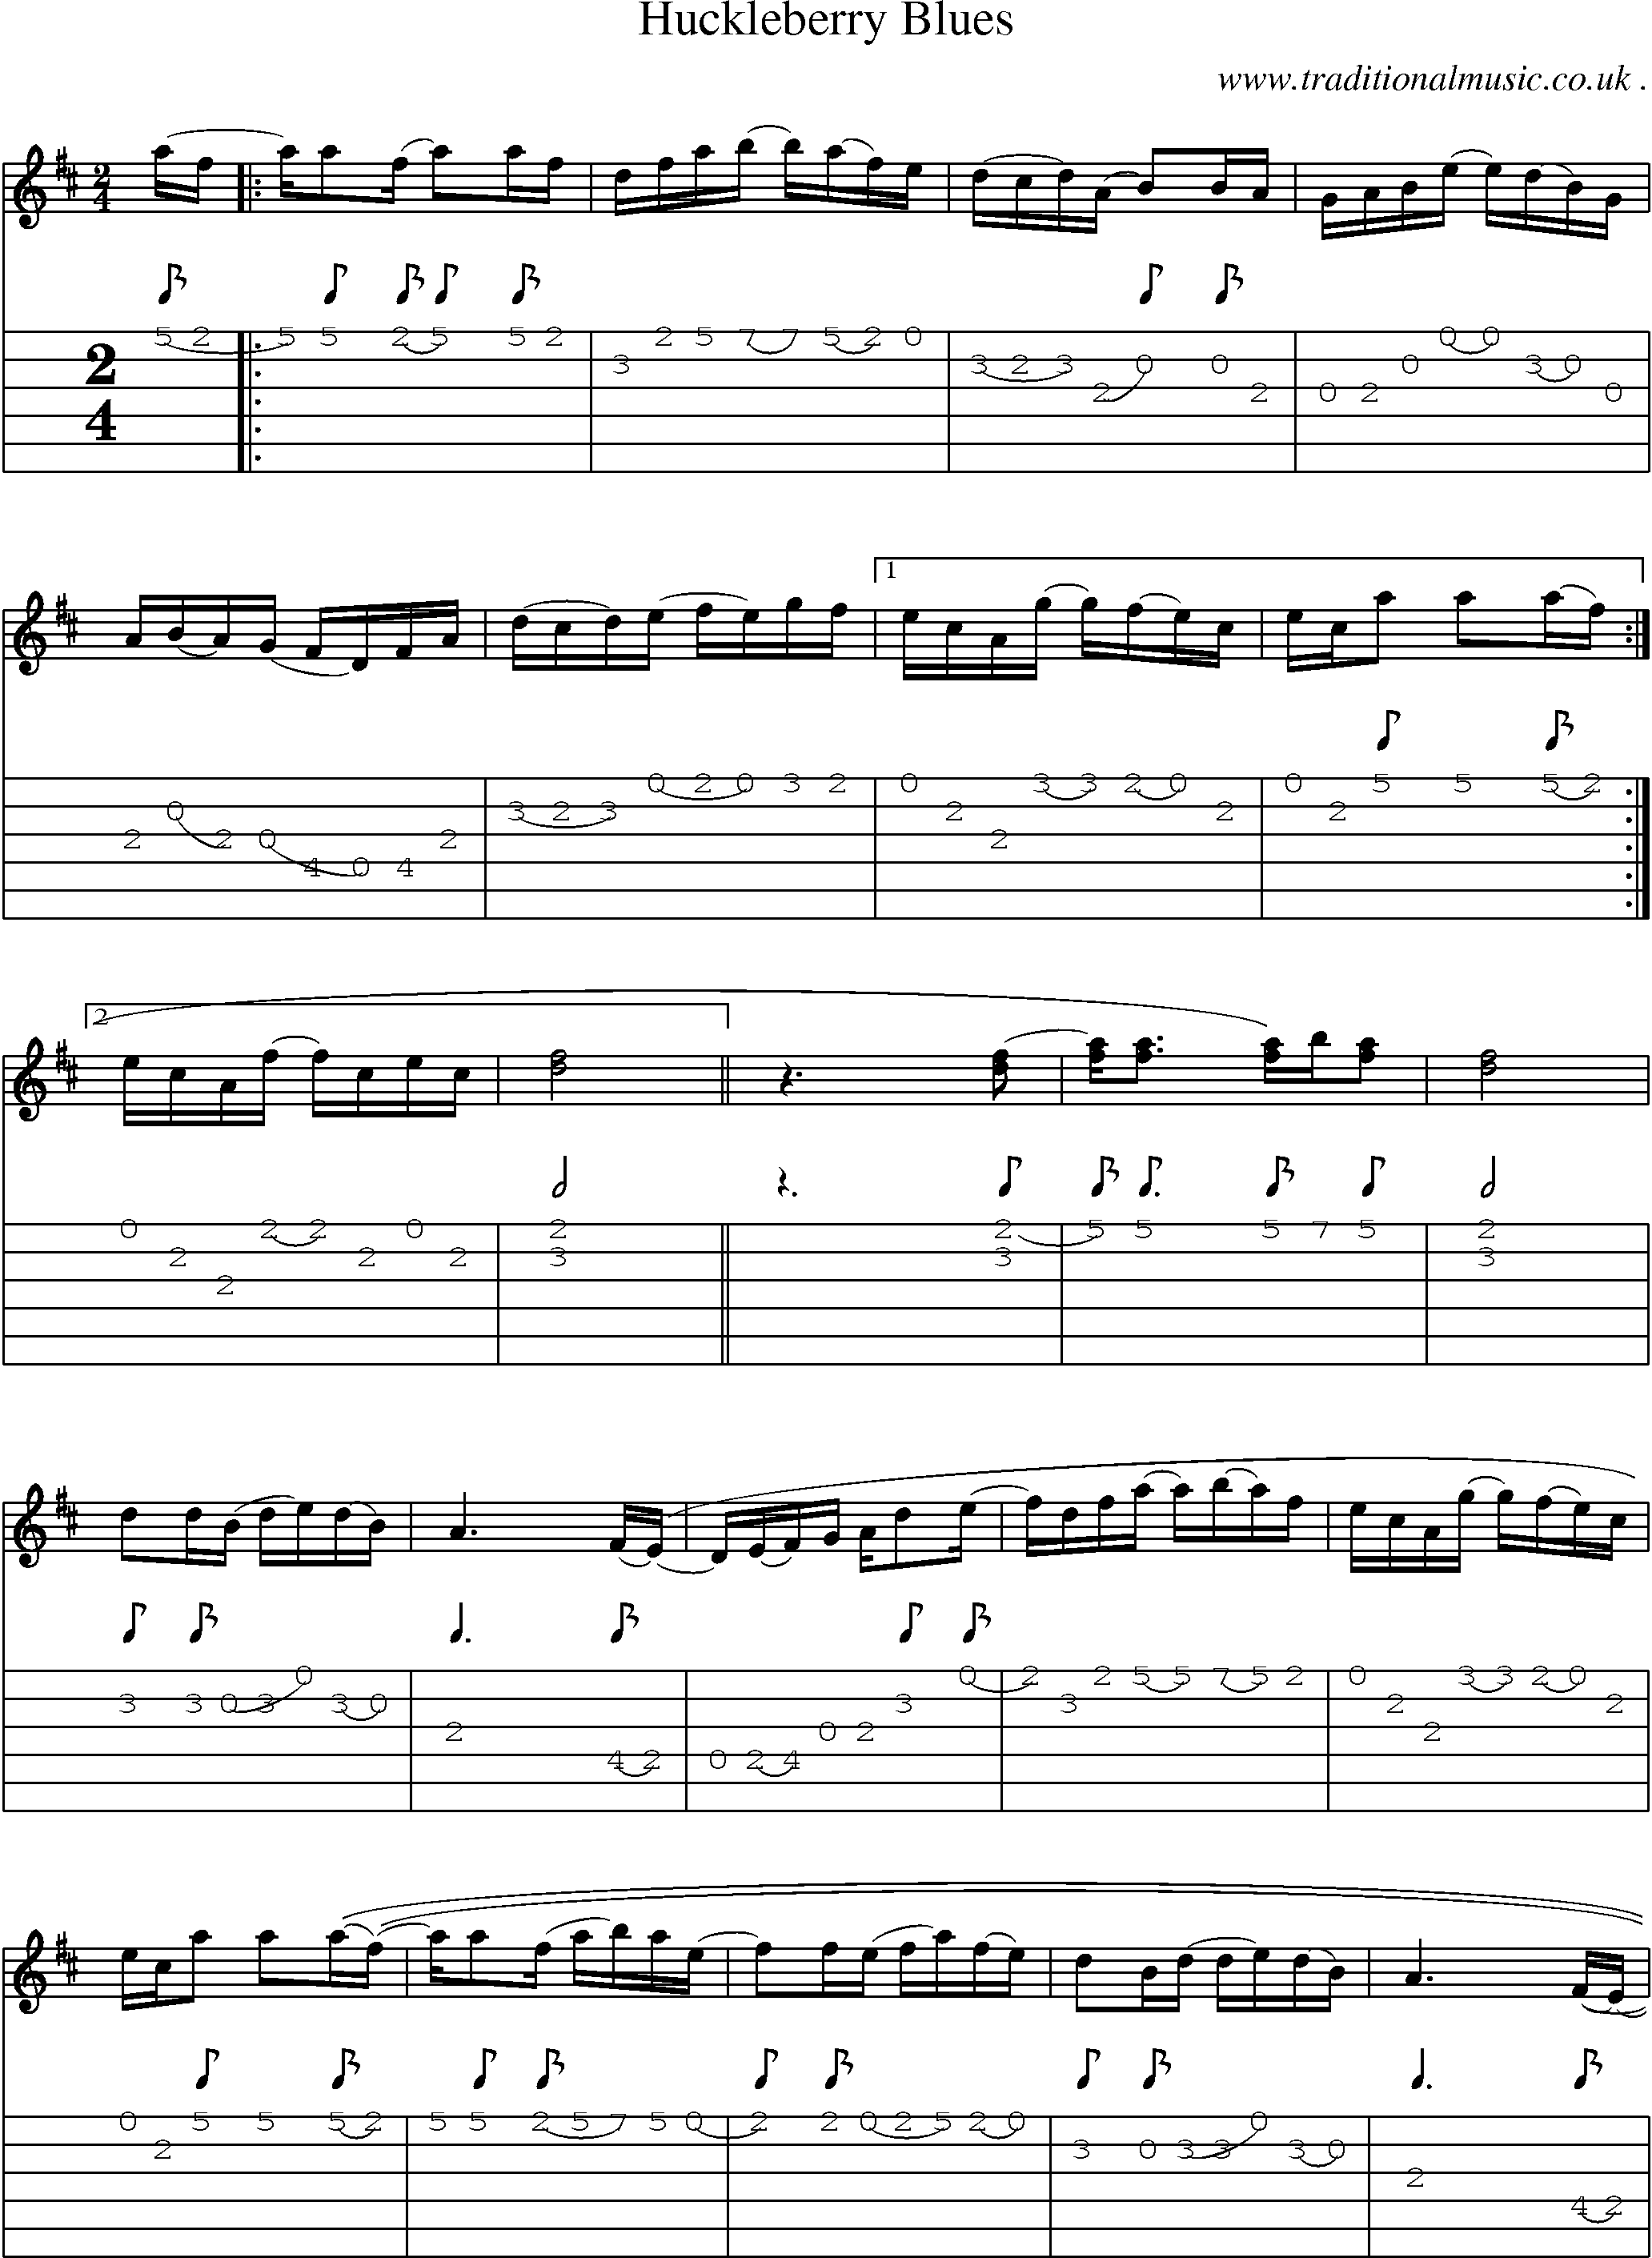 Music Score and Guitar Tabs for Huckleberry Blues